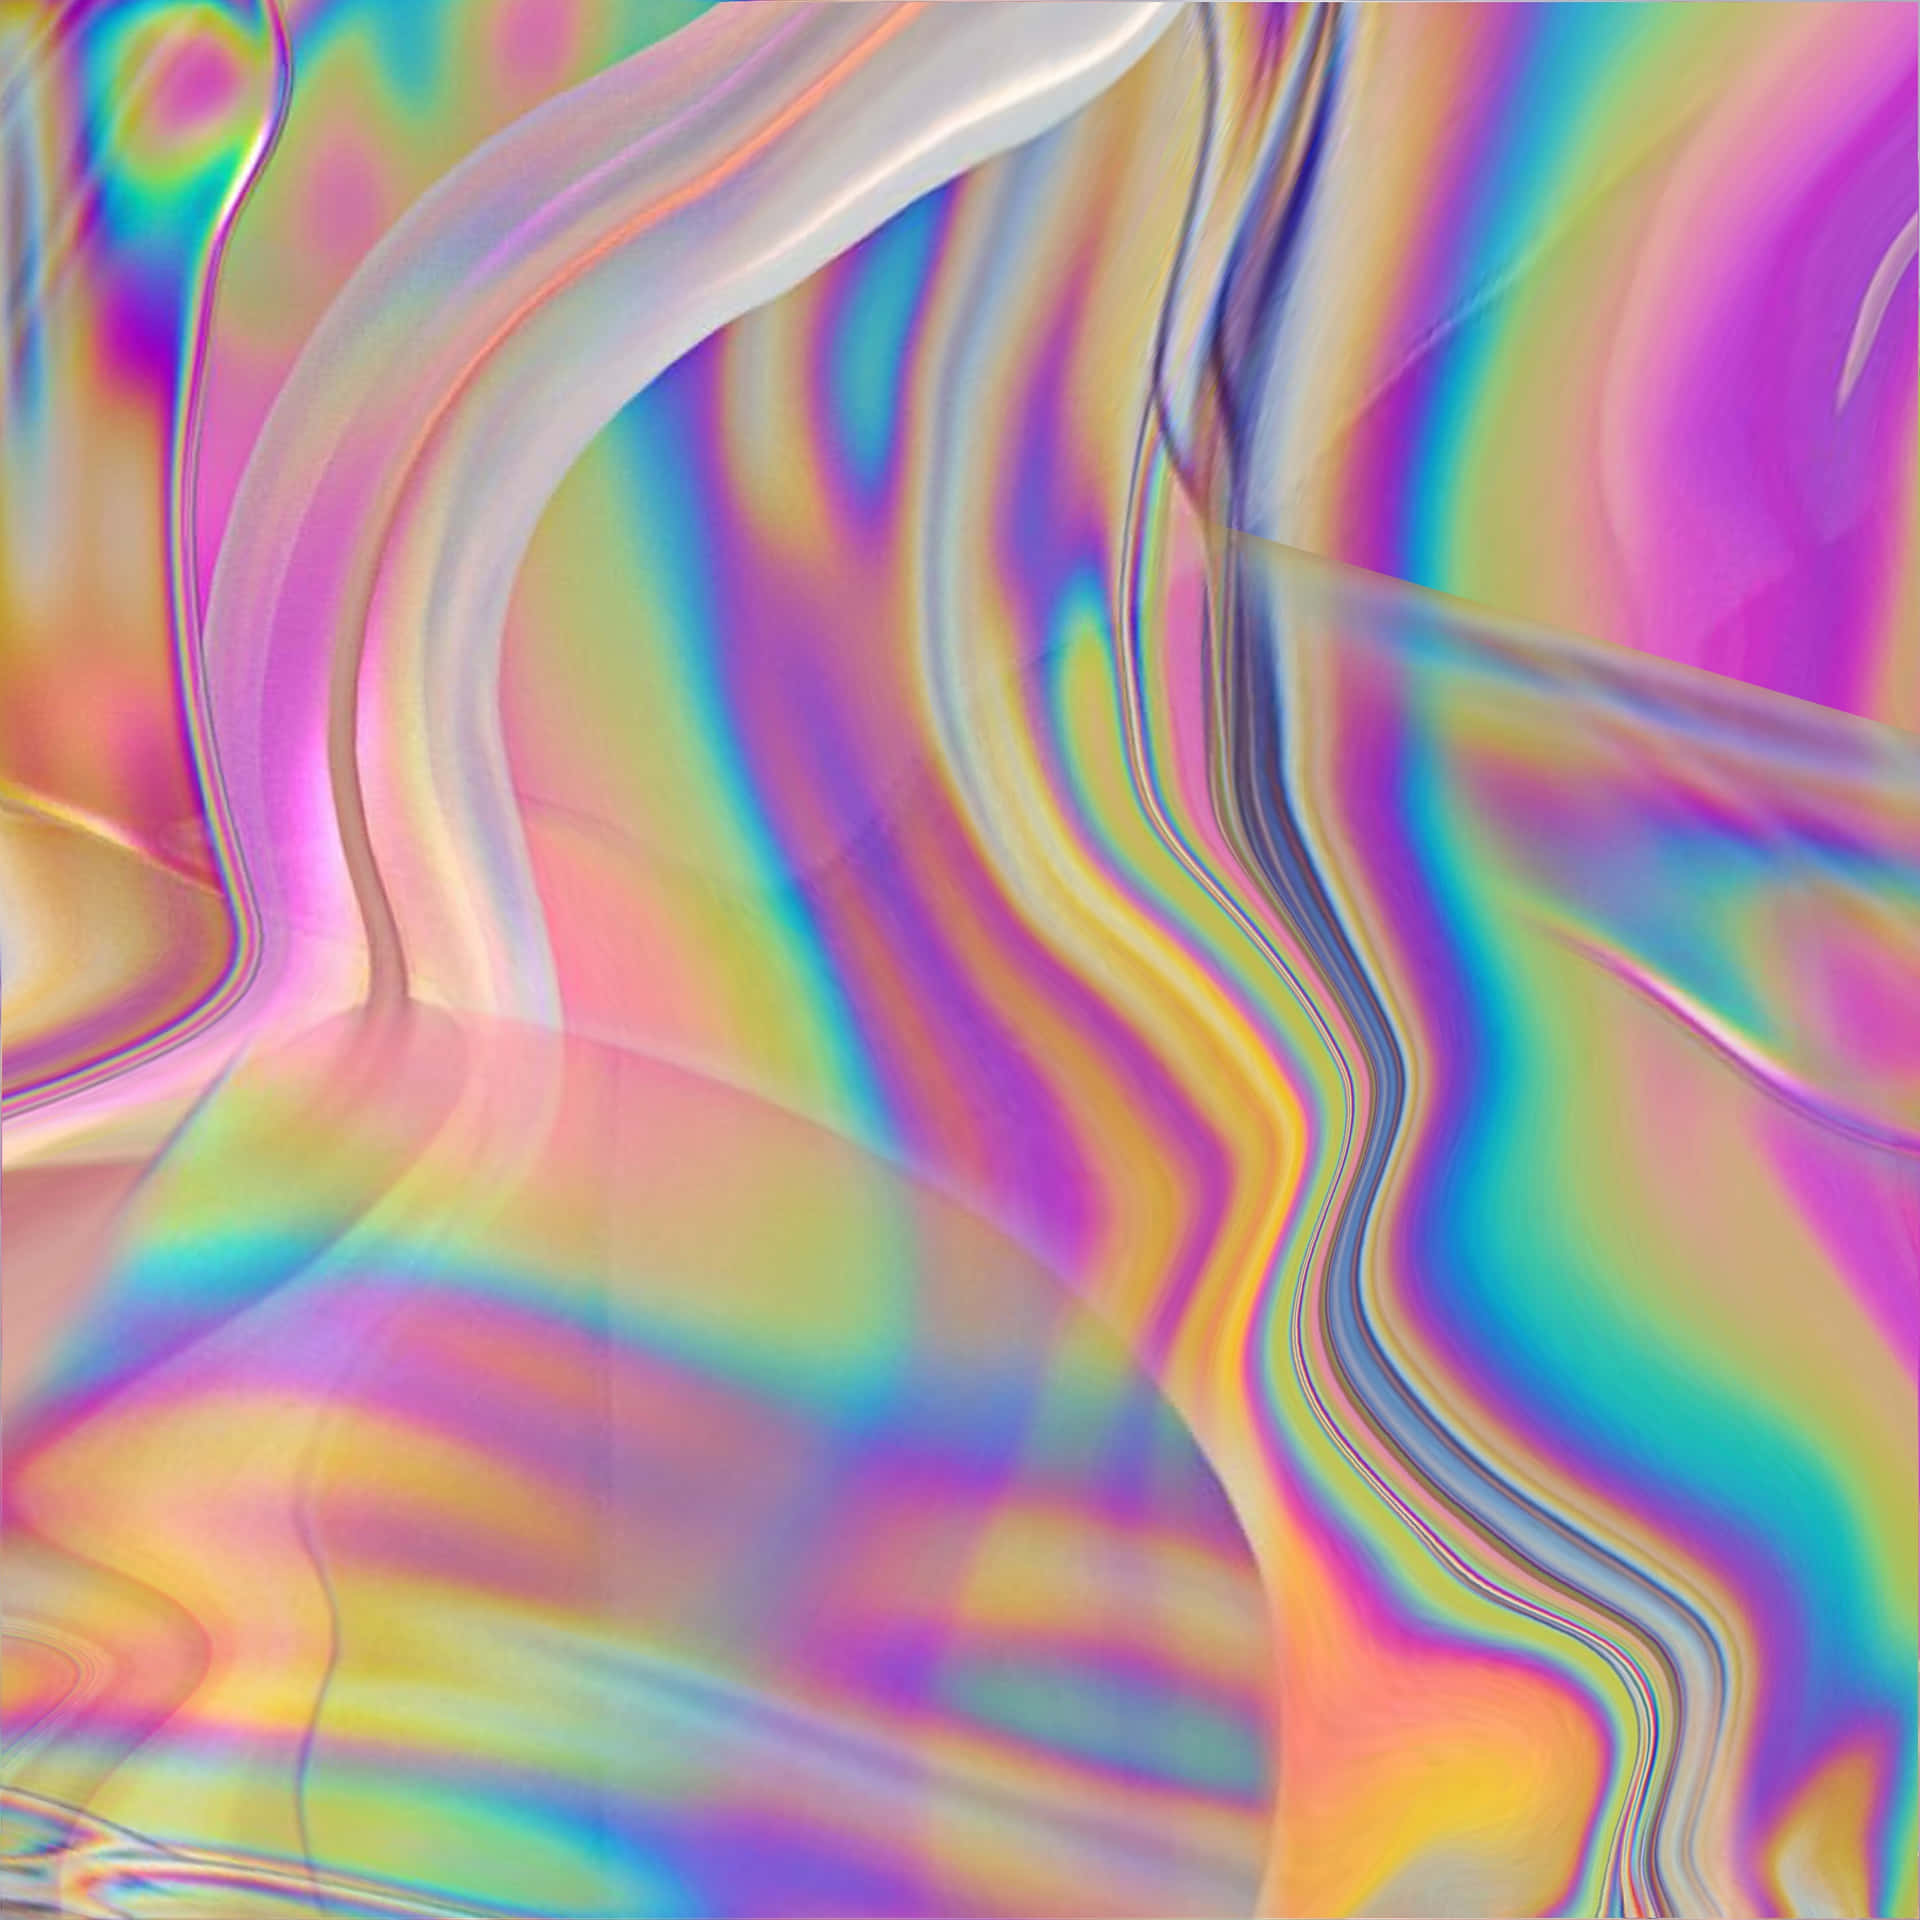 A Colorful Abstract Image Of A Rainbow Wallpaper